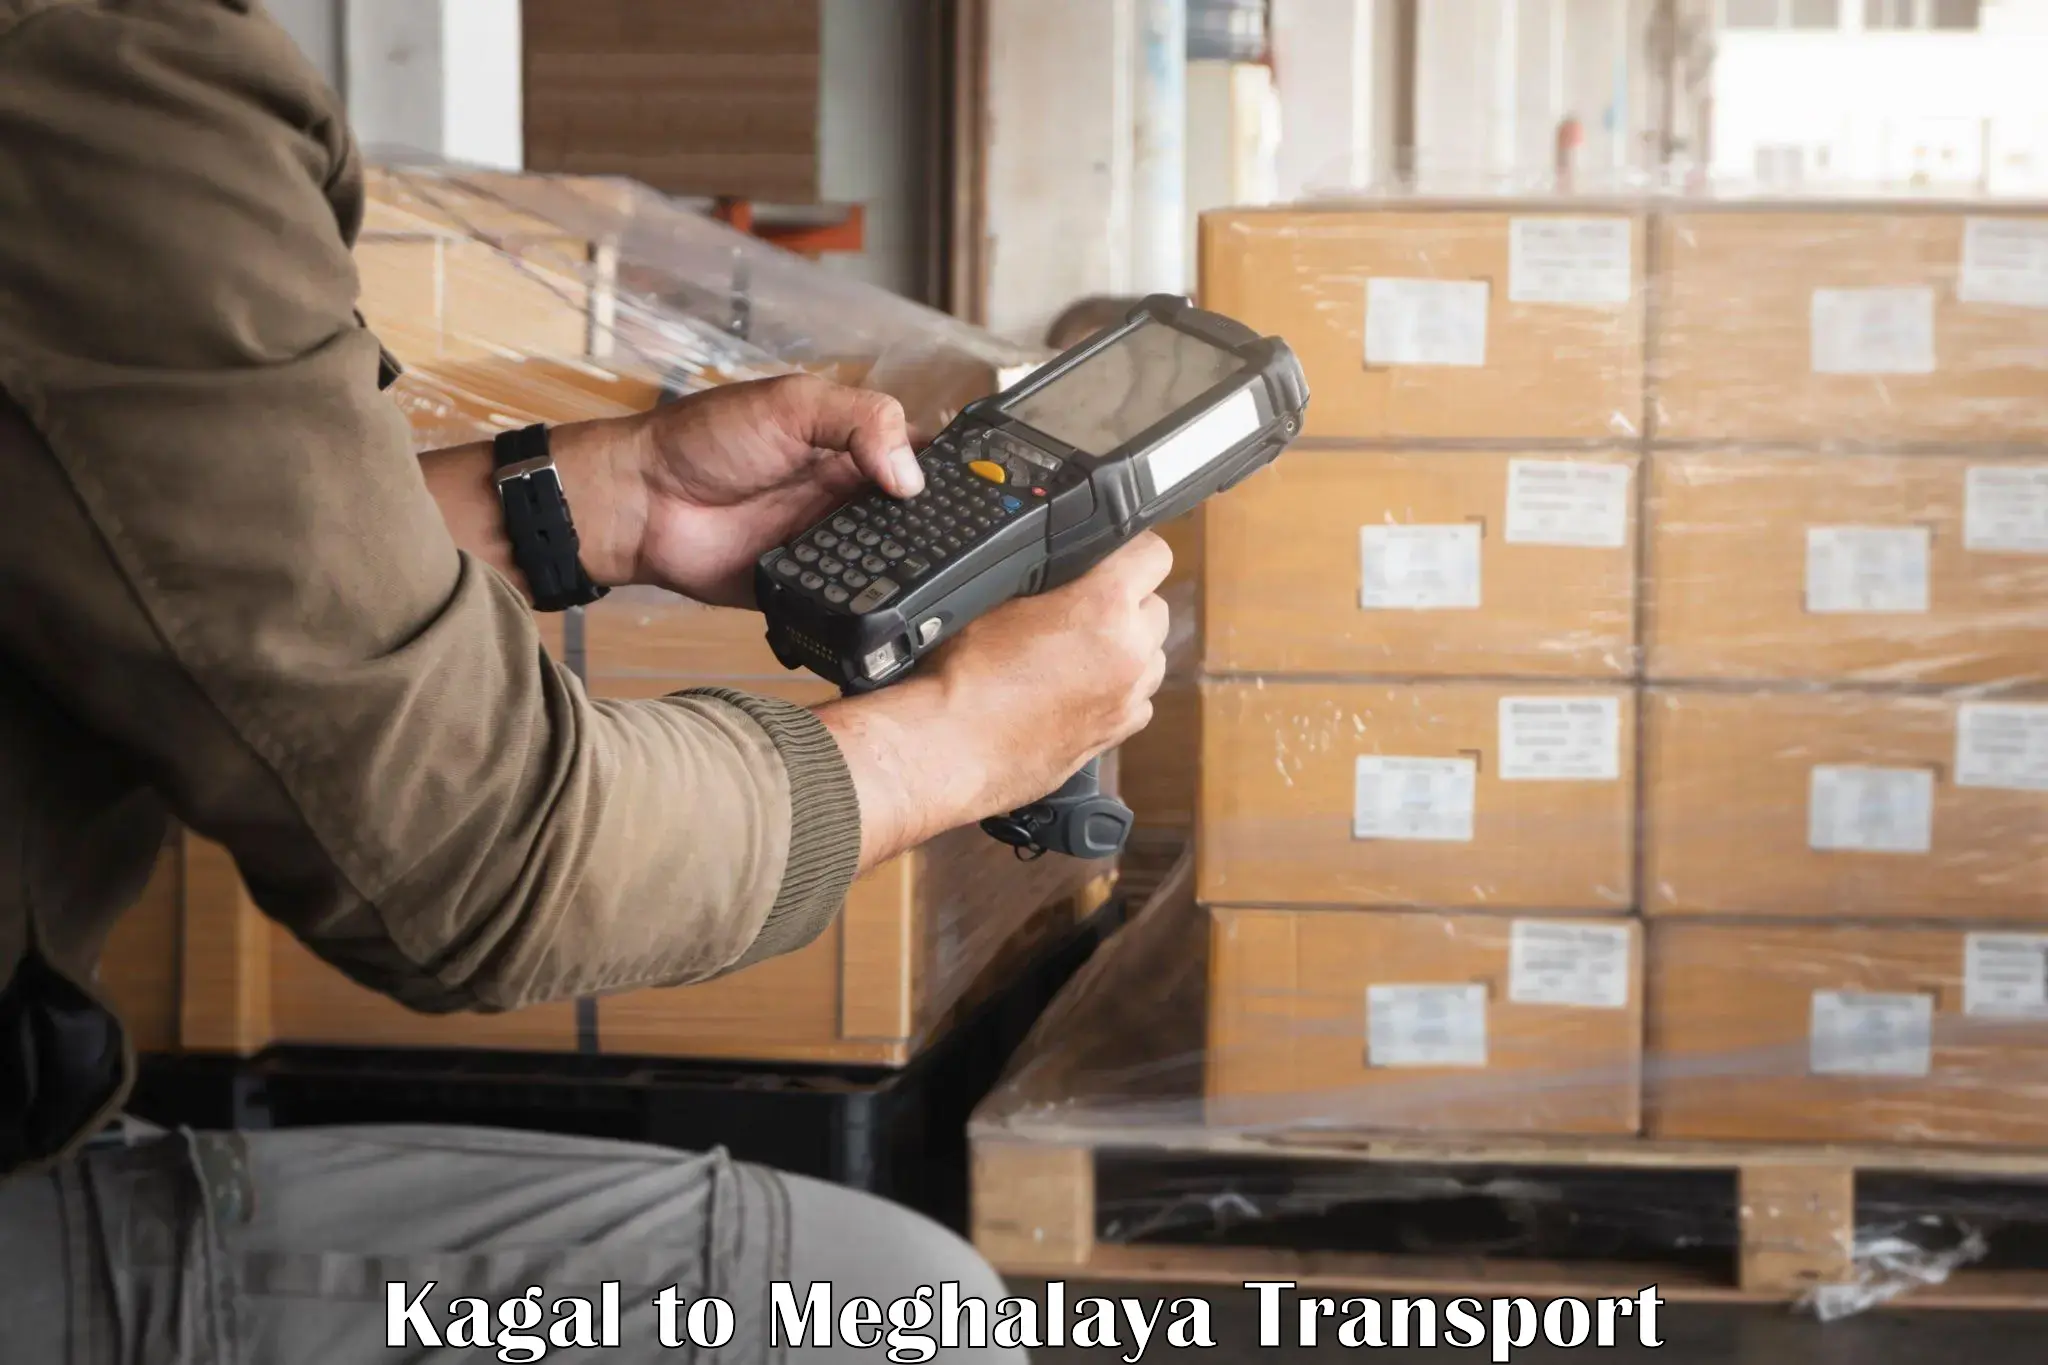 Parcel transport services in Kagal to Shillong